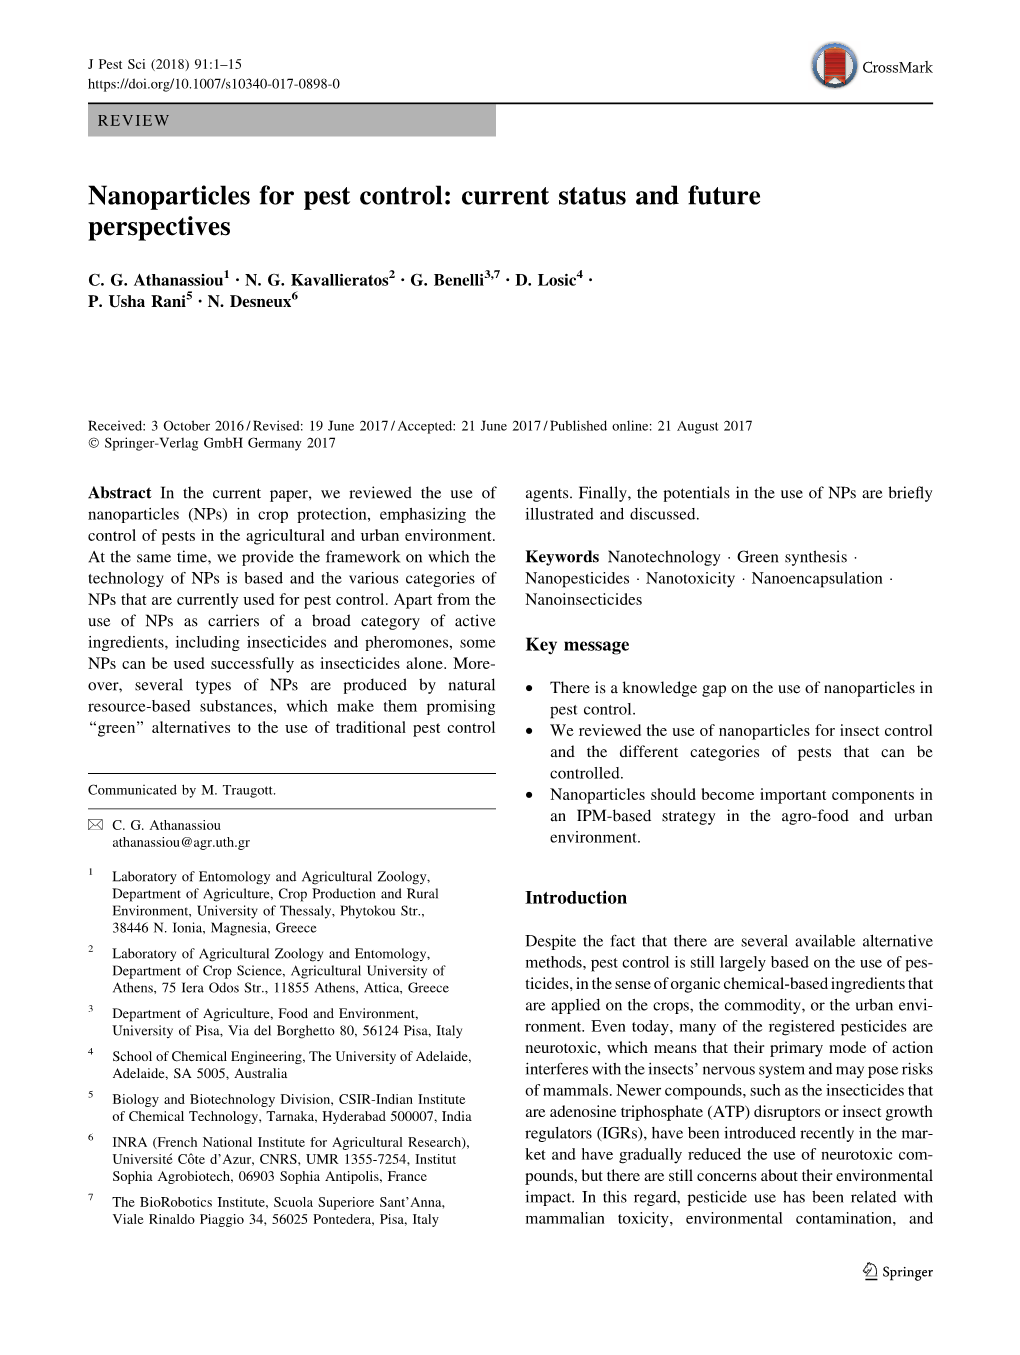 Nanoparticles for Pest Control: Current Status and Future Perspectives